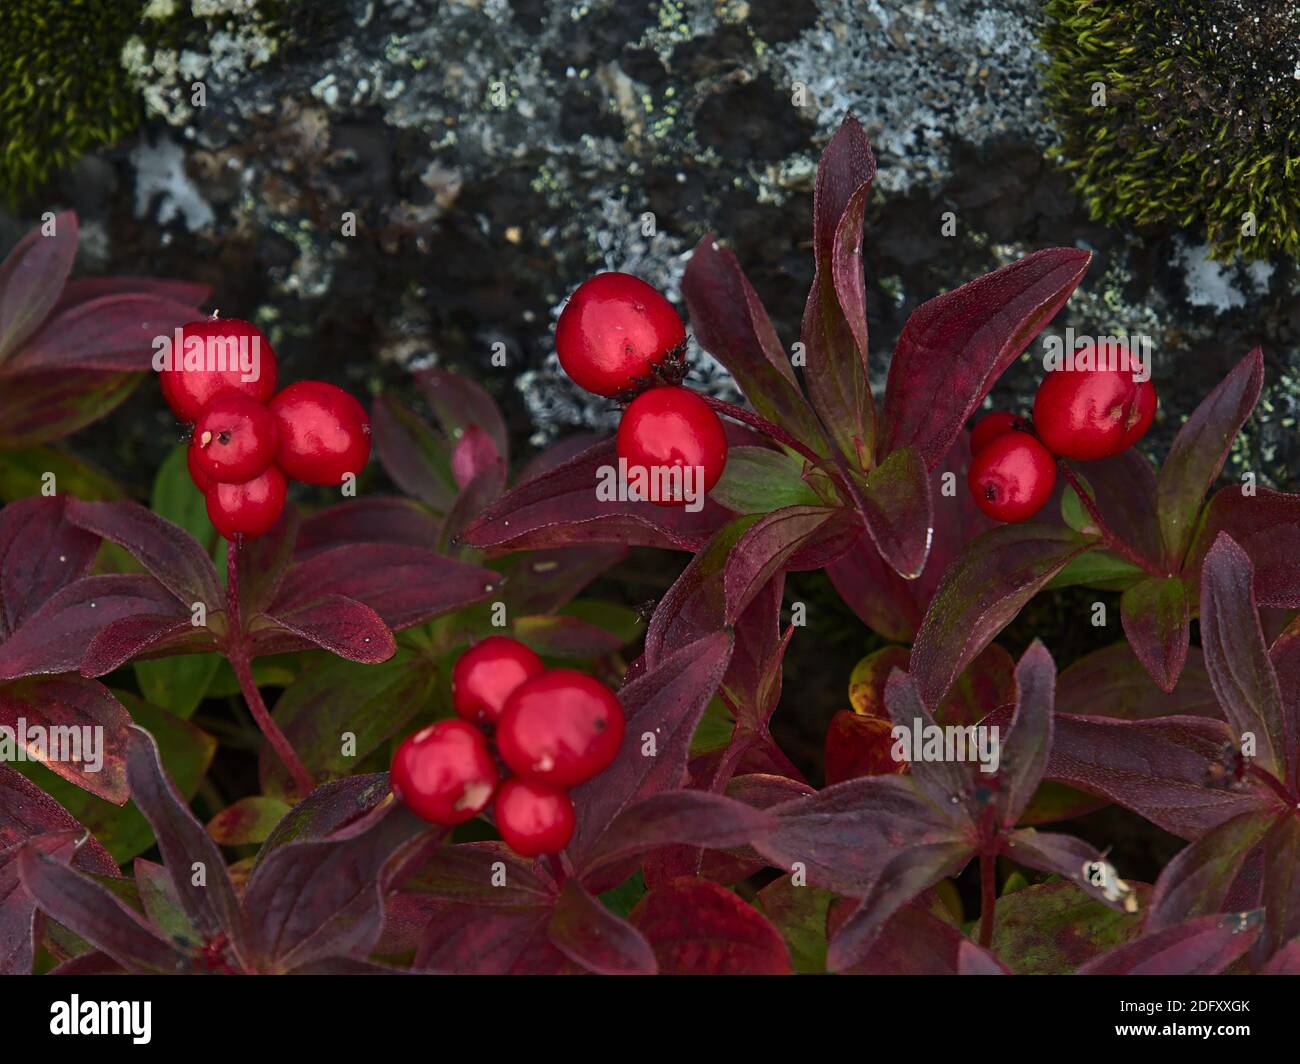 Close-up view of cornus suecica (dwarf cornel, bunchberry) bush with ripe red colored berries and purple discolored leaves near Digermulen, Norway. Stock Photo